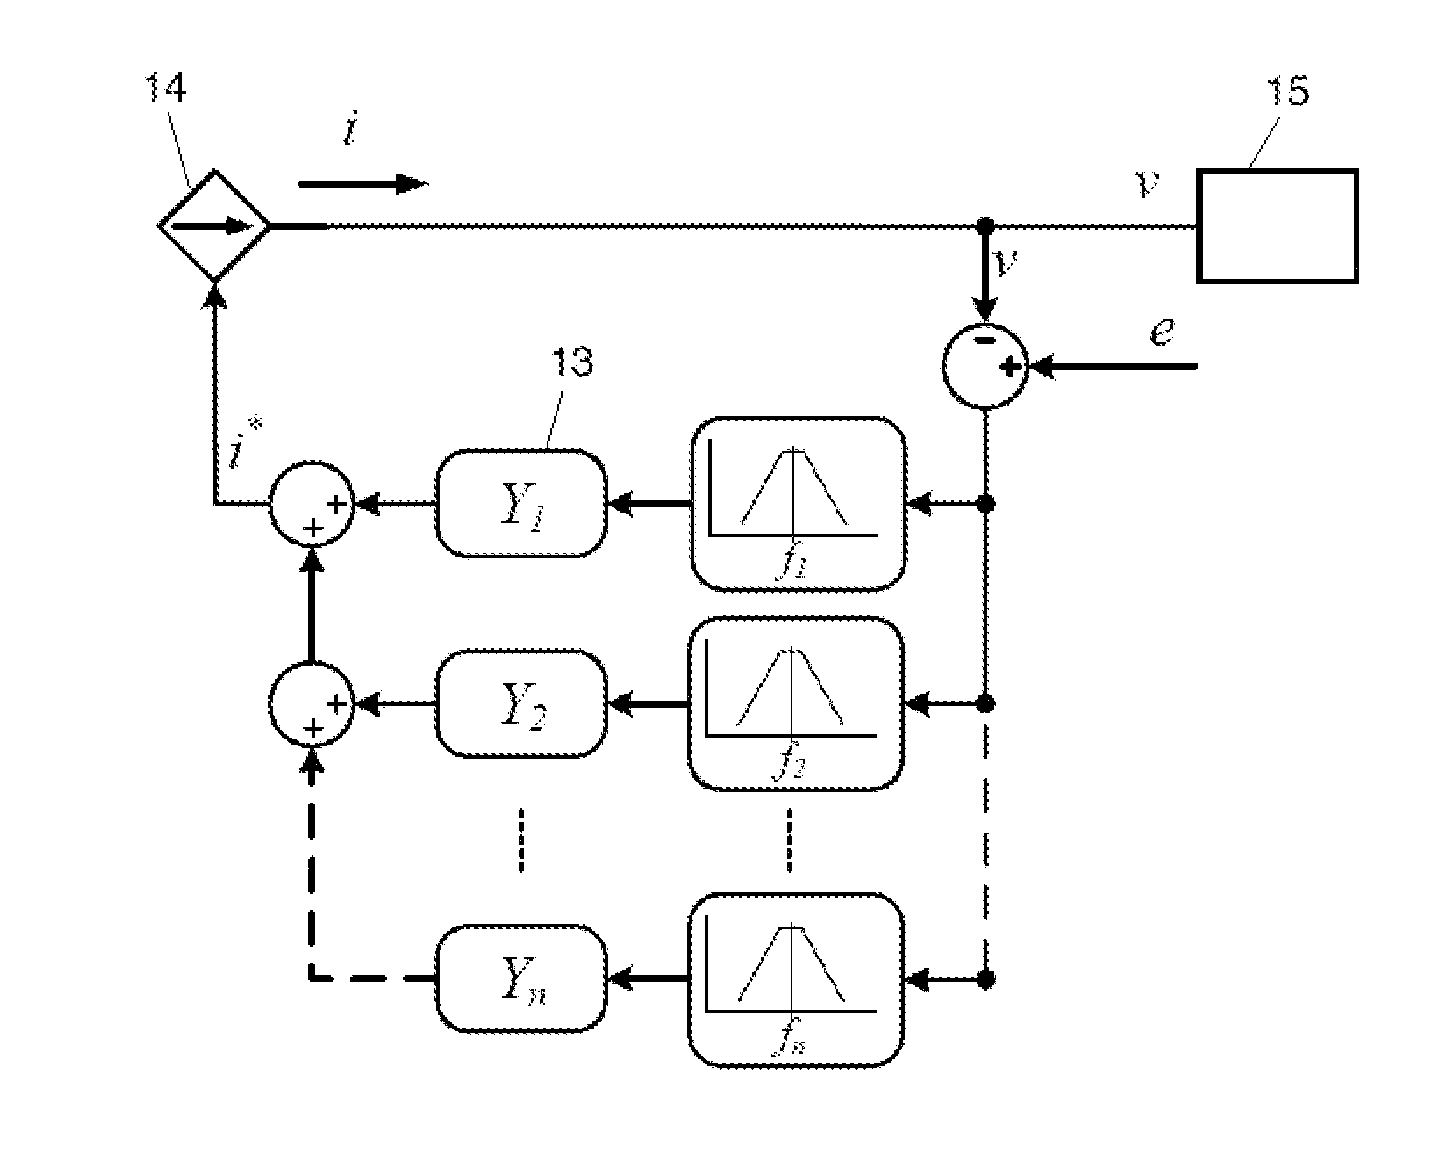 Virtual admittance controller based on static power converters